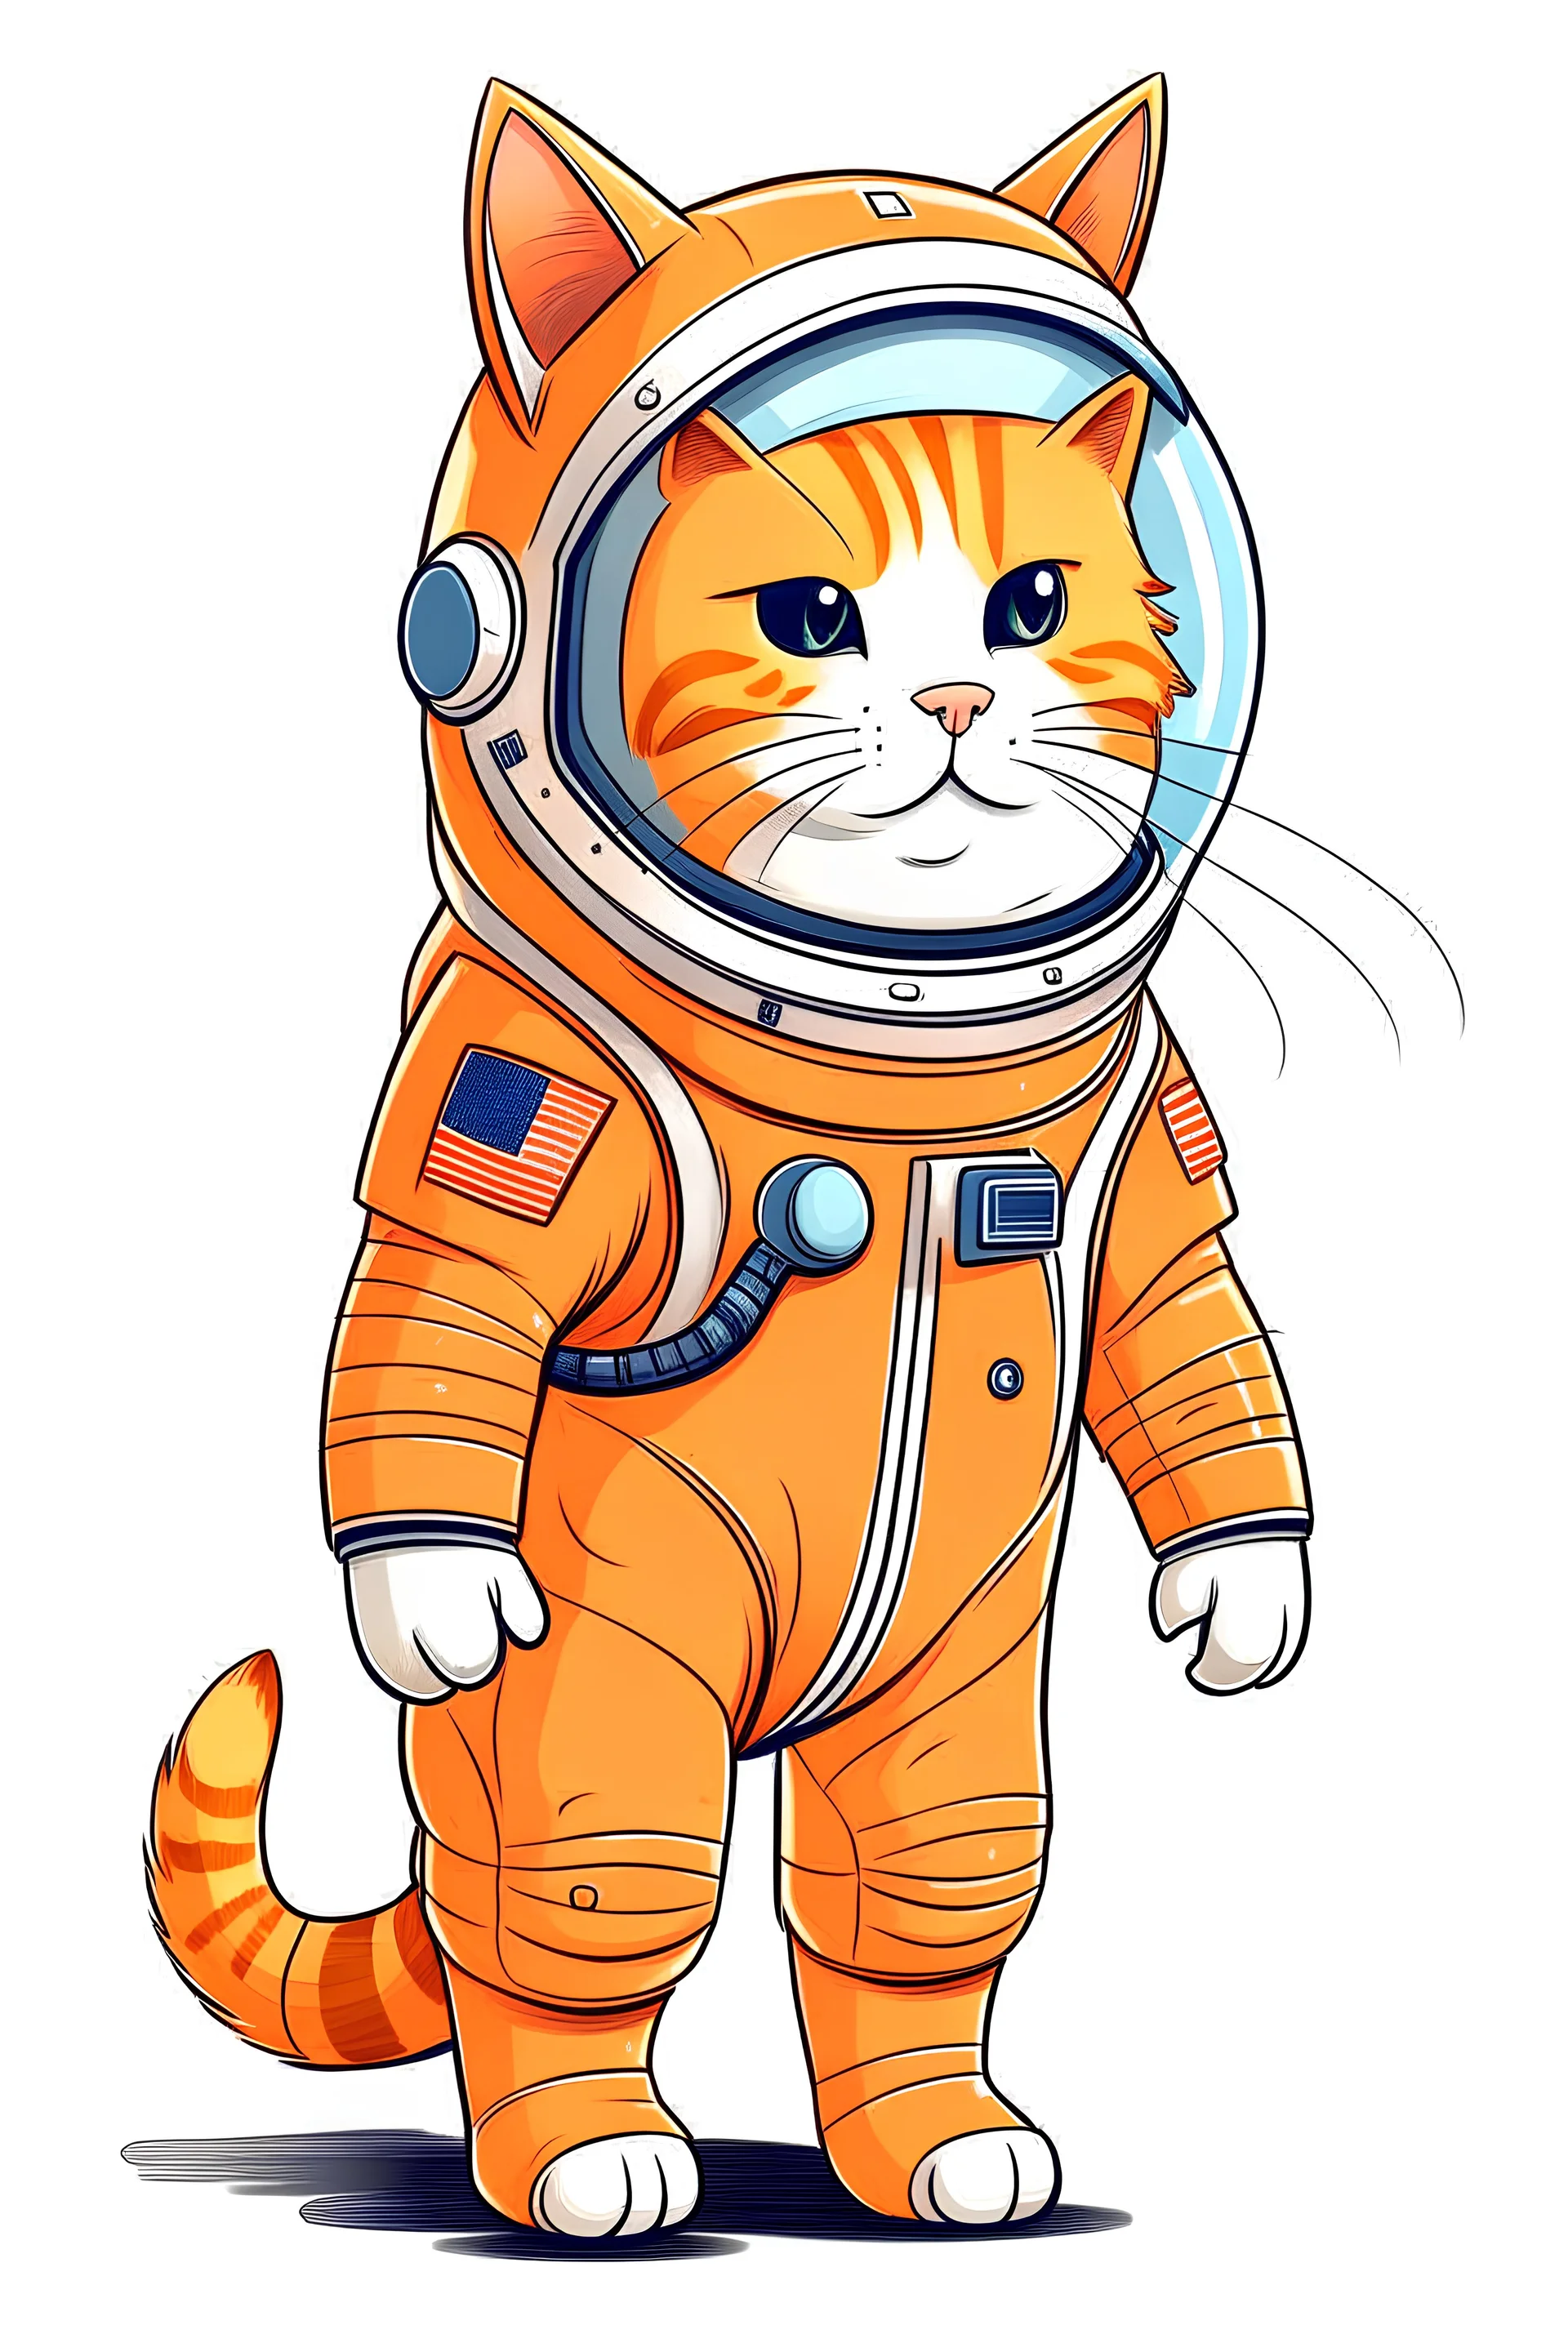 Draw a orange cat wearing a spacesuit